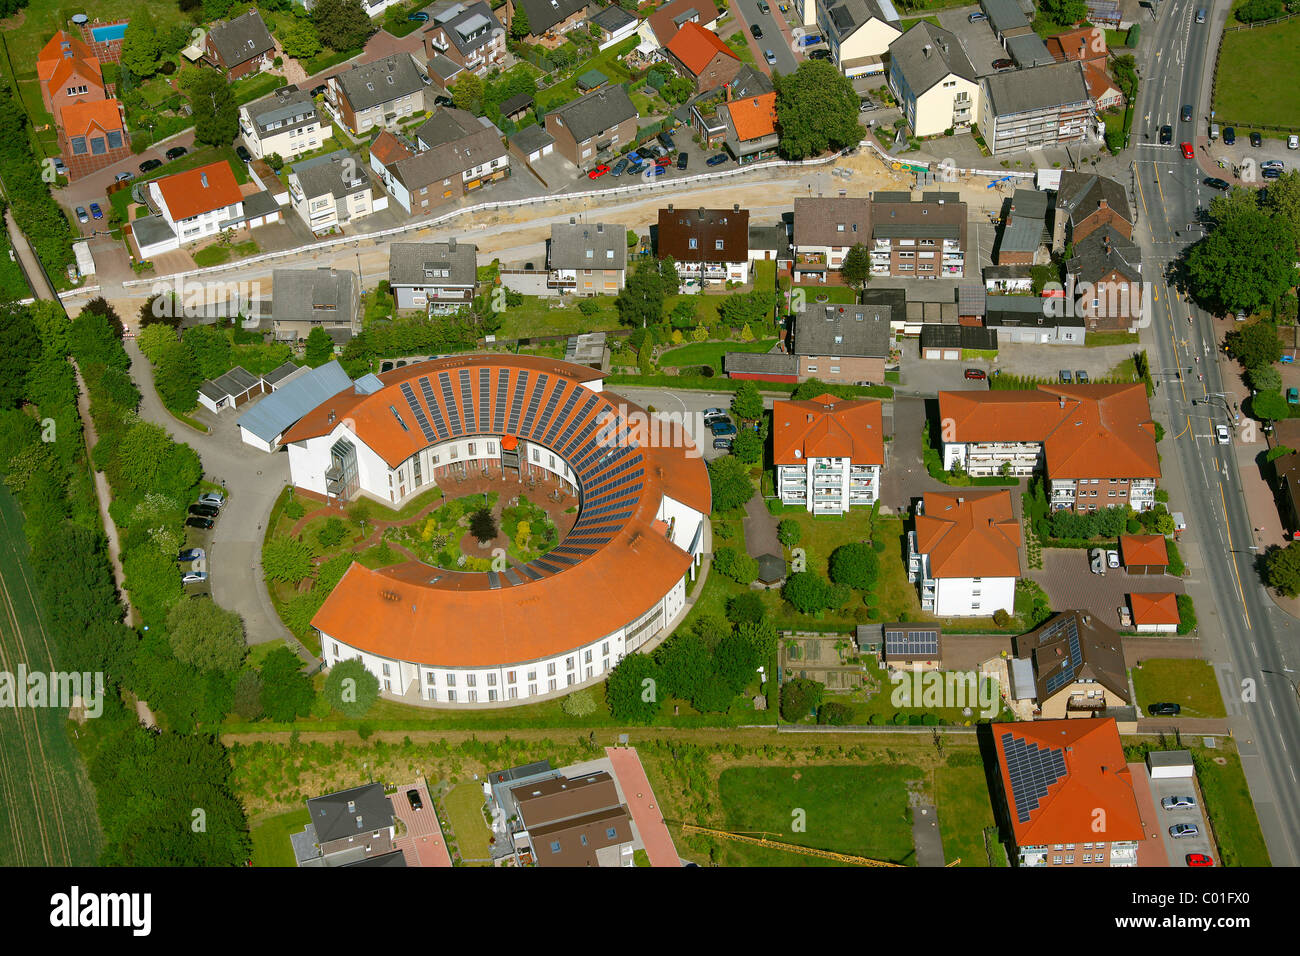 Aerial view, circular building, red roof, old people's home, Alt-Oer retirement home, Oer-Erkenschwick, Ruhrgebiet area Stock Photo